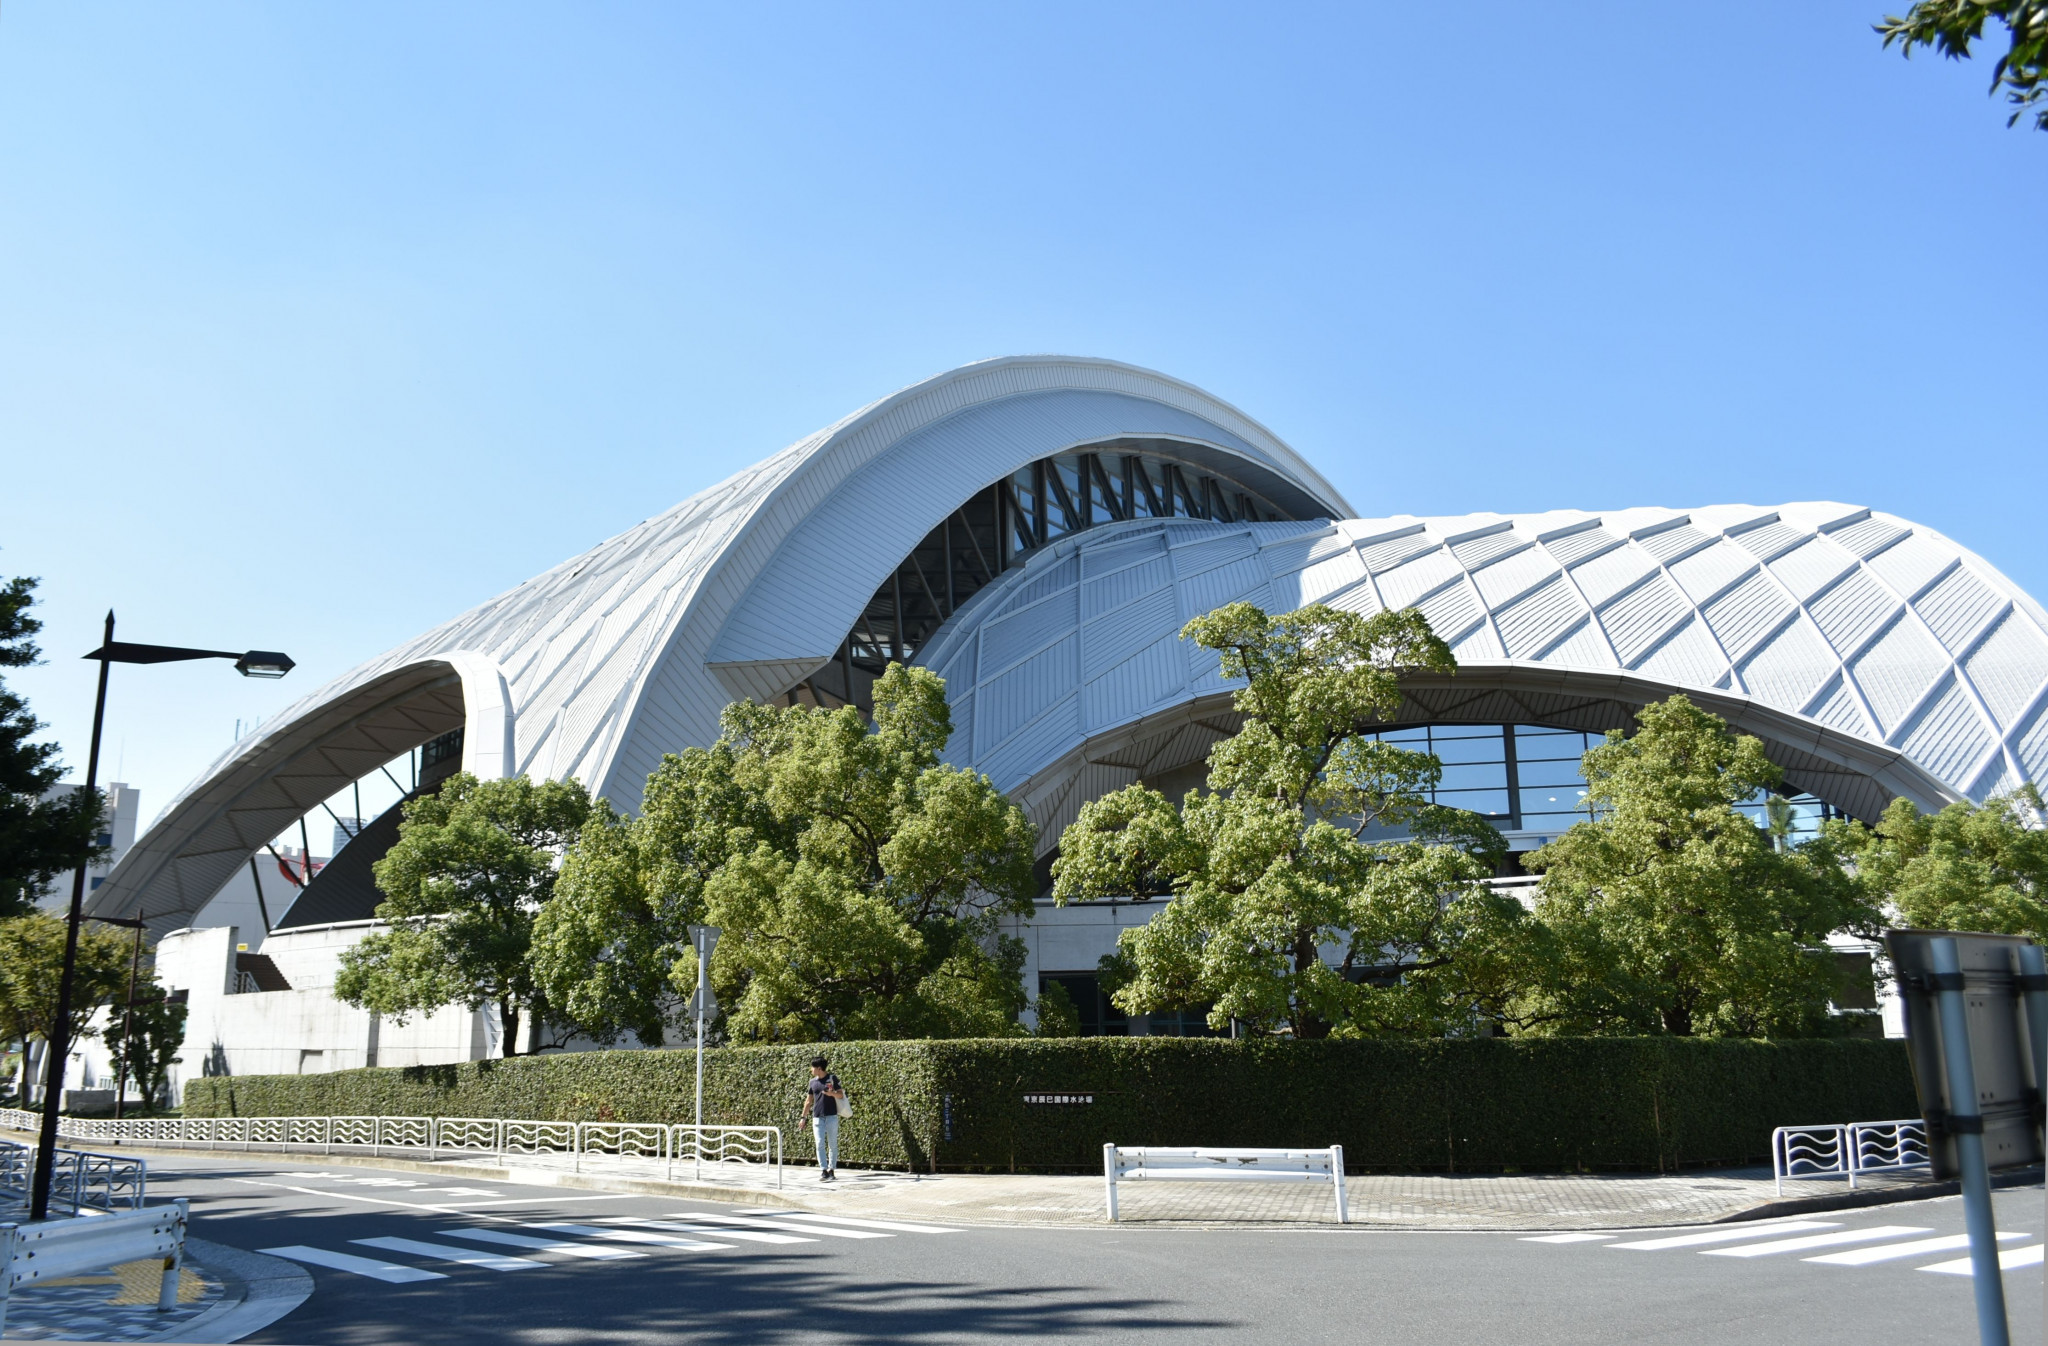 Urgent measures will be taken against asbestos found at the Tokyo Tatsumi International Swimming Center ©Wikipedia